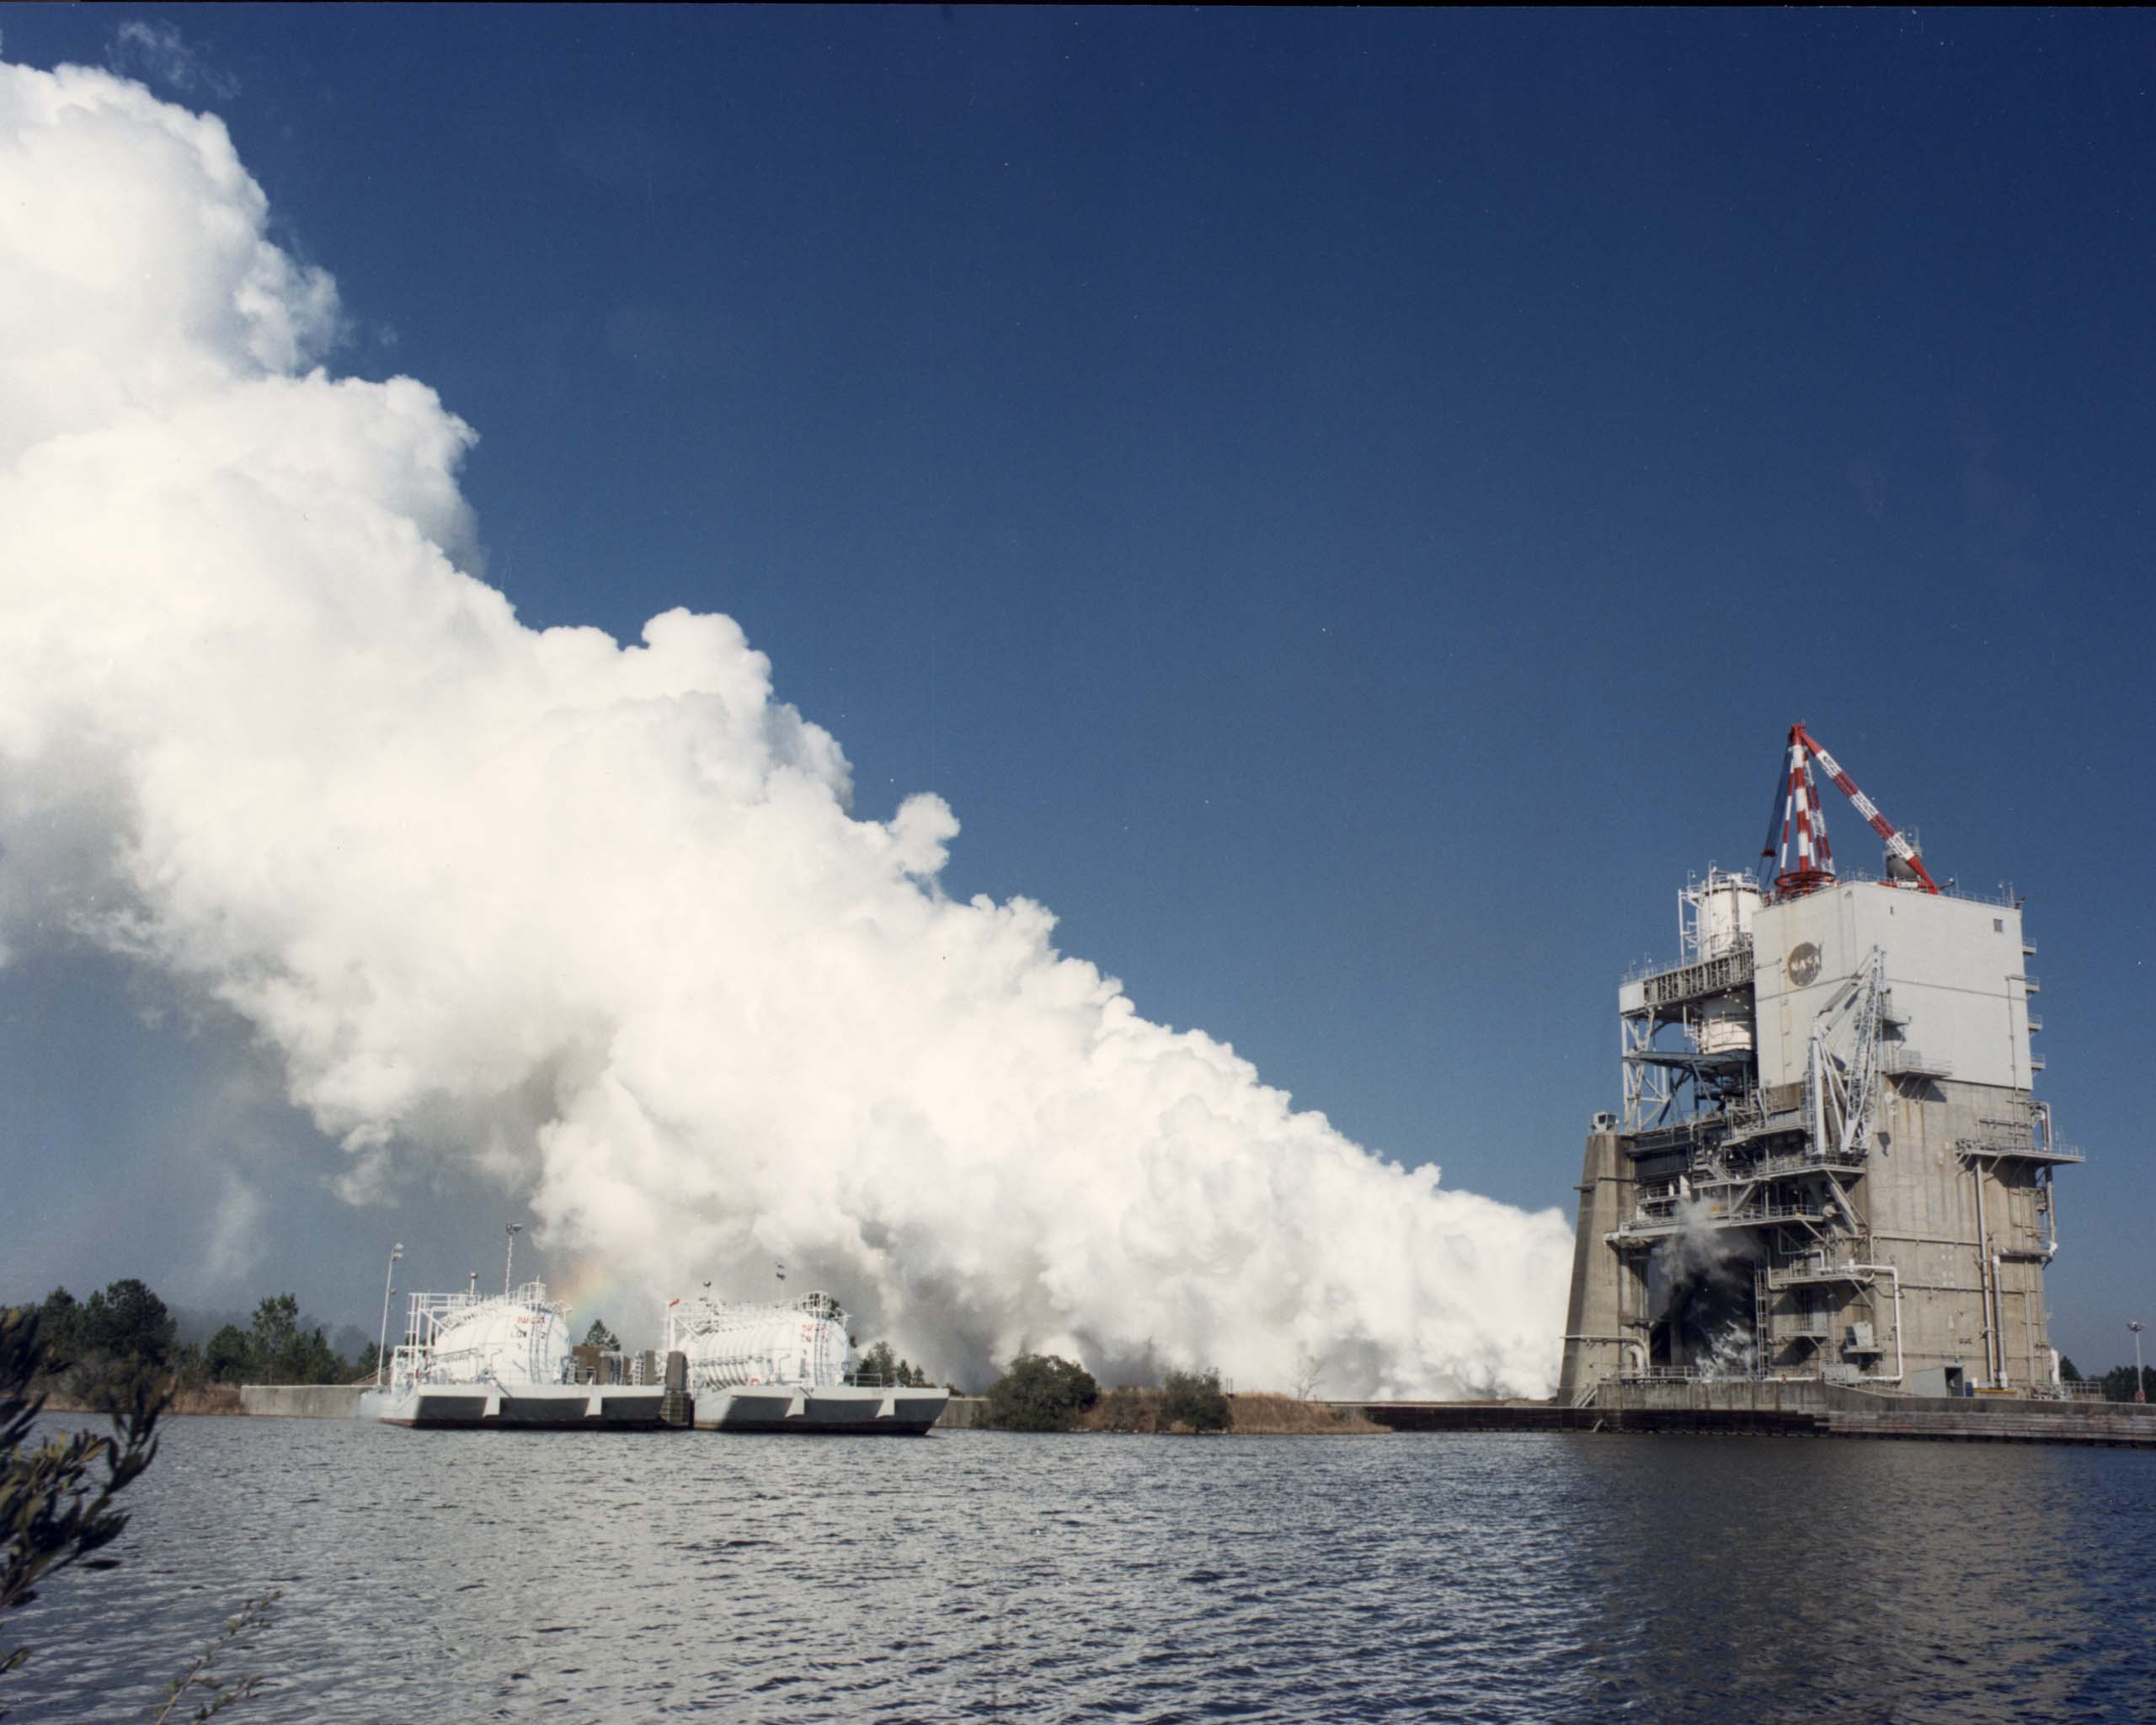 Clouds of steam billow out from the A-1 Test Stand during a test firing of a Space Shuttle Main Engine